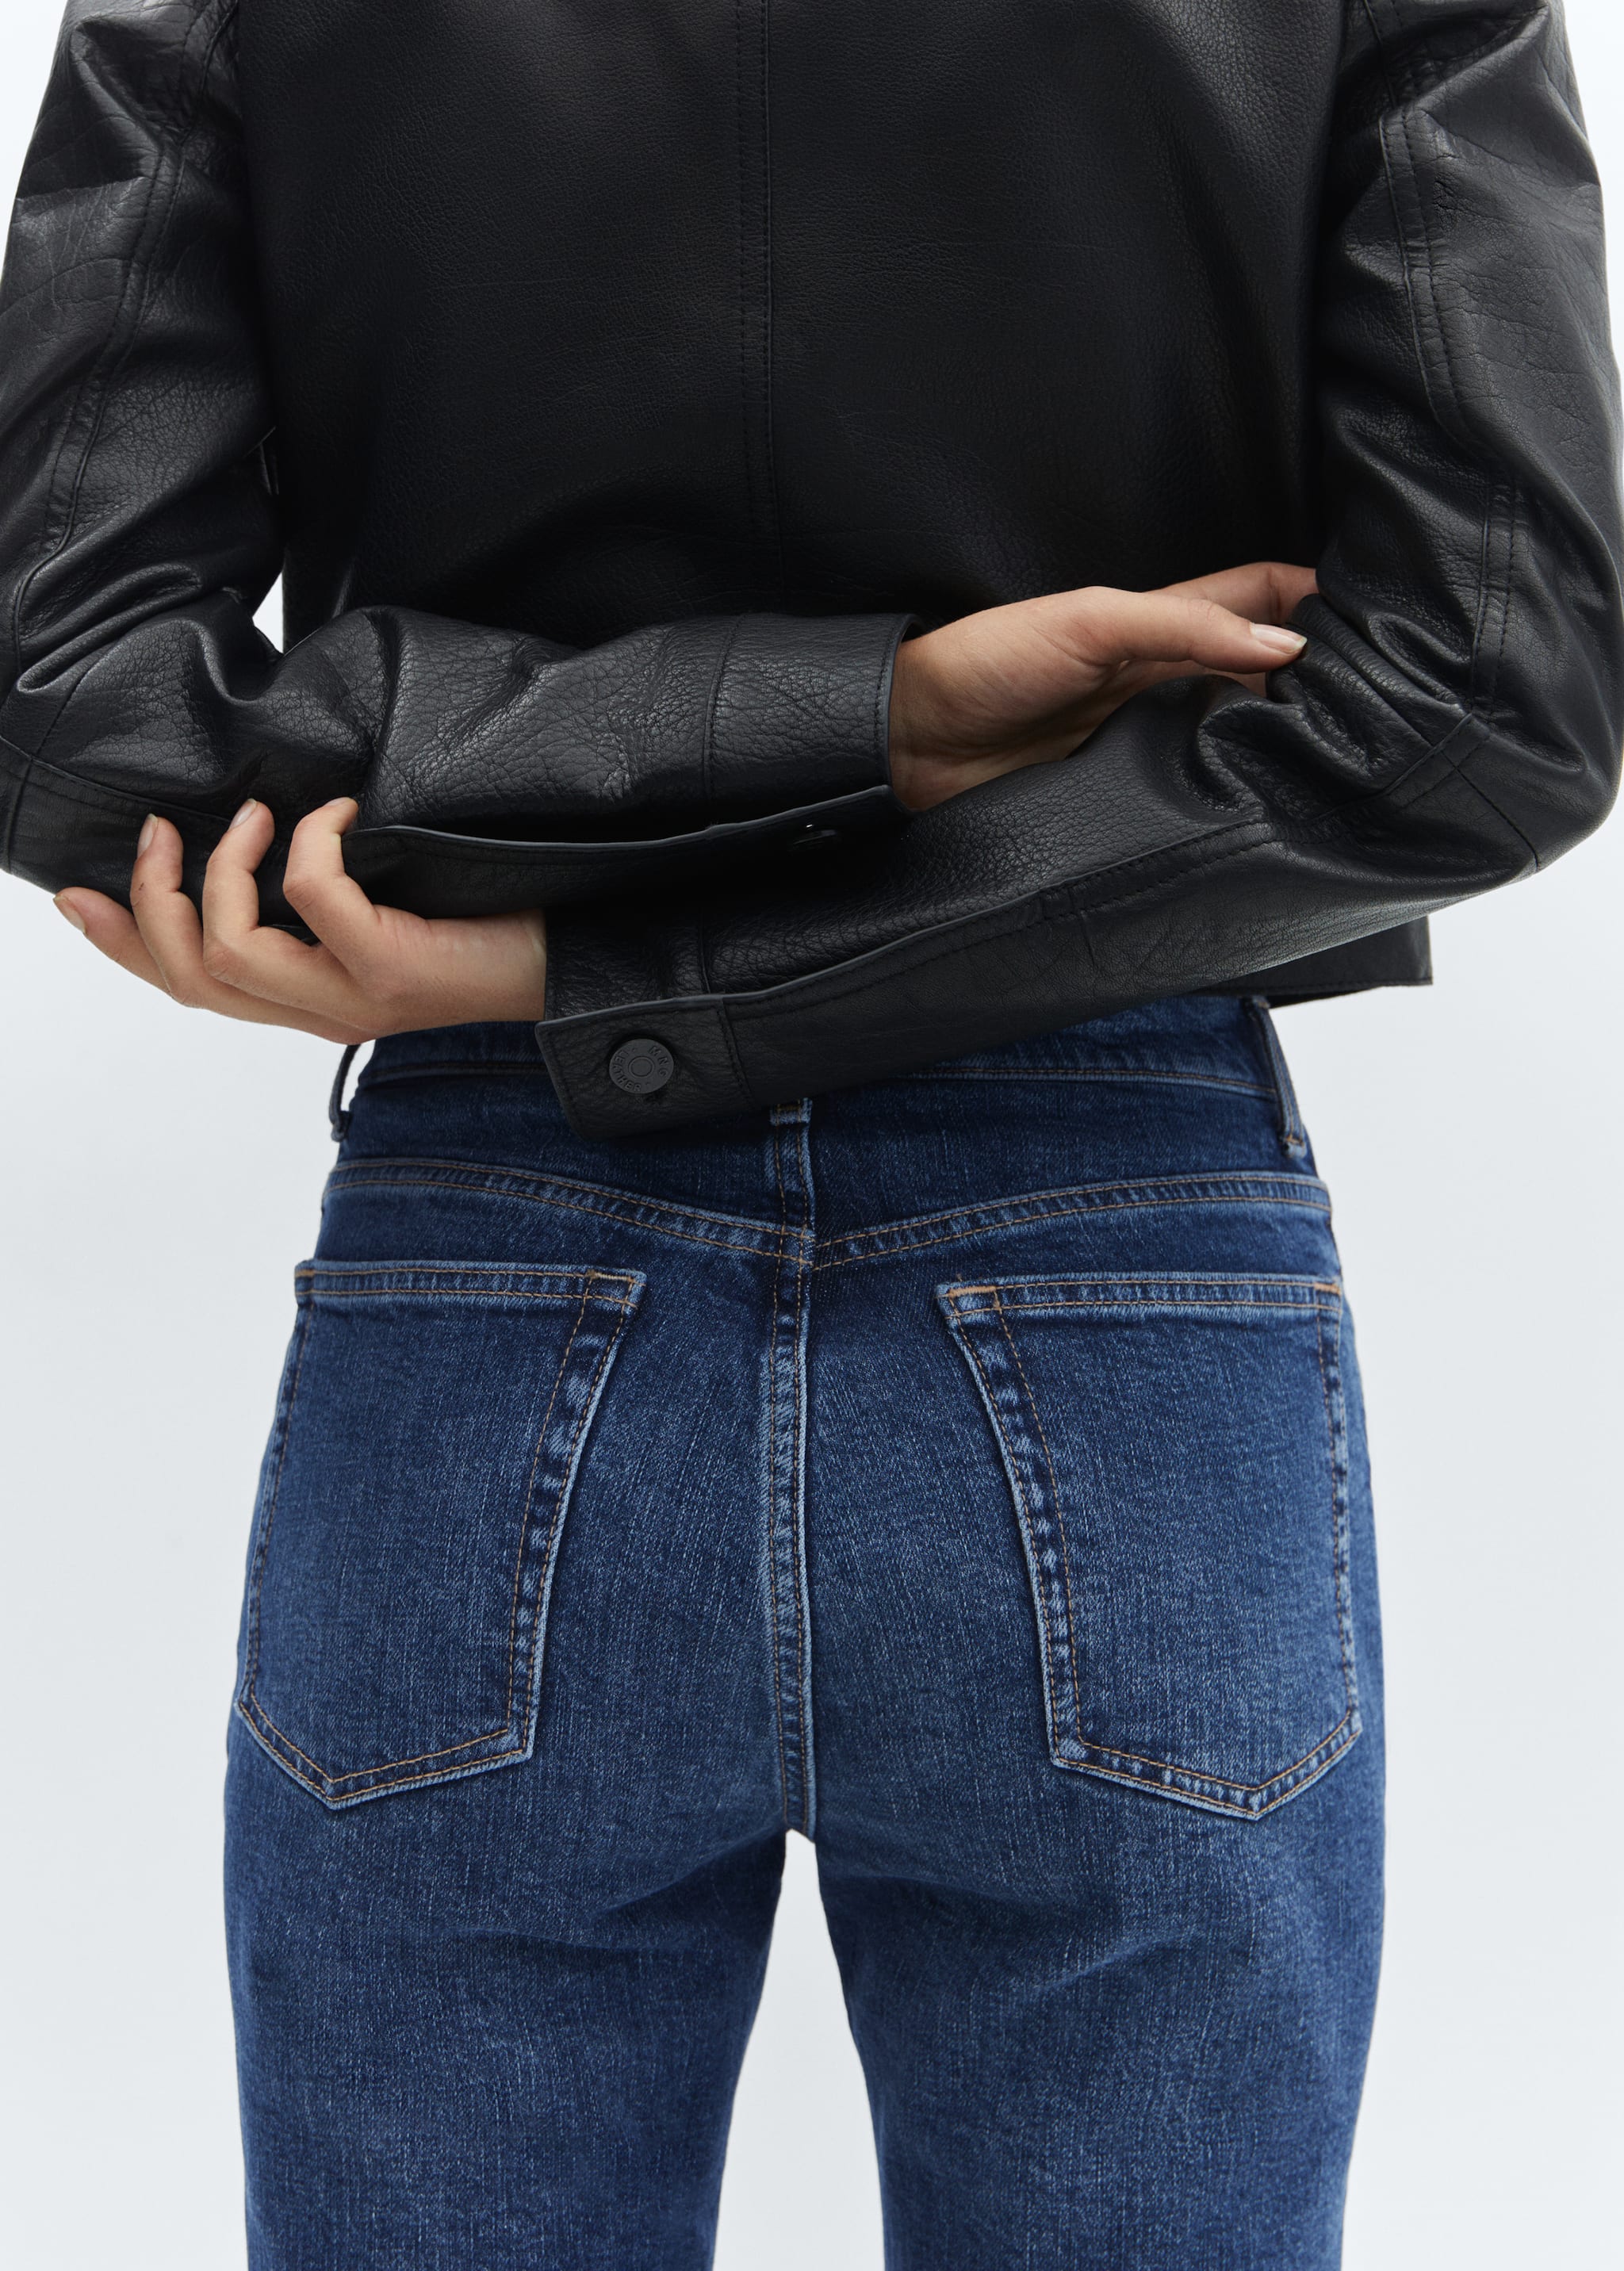 Slim cropped jeans - Details of the article 2